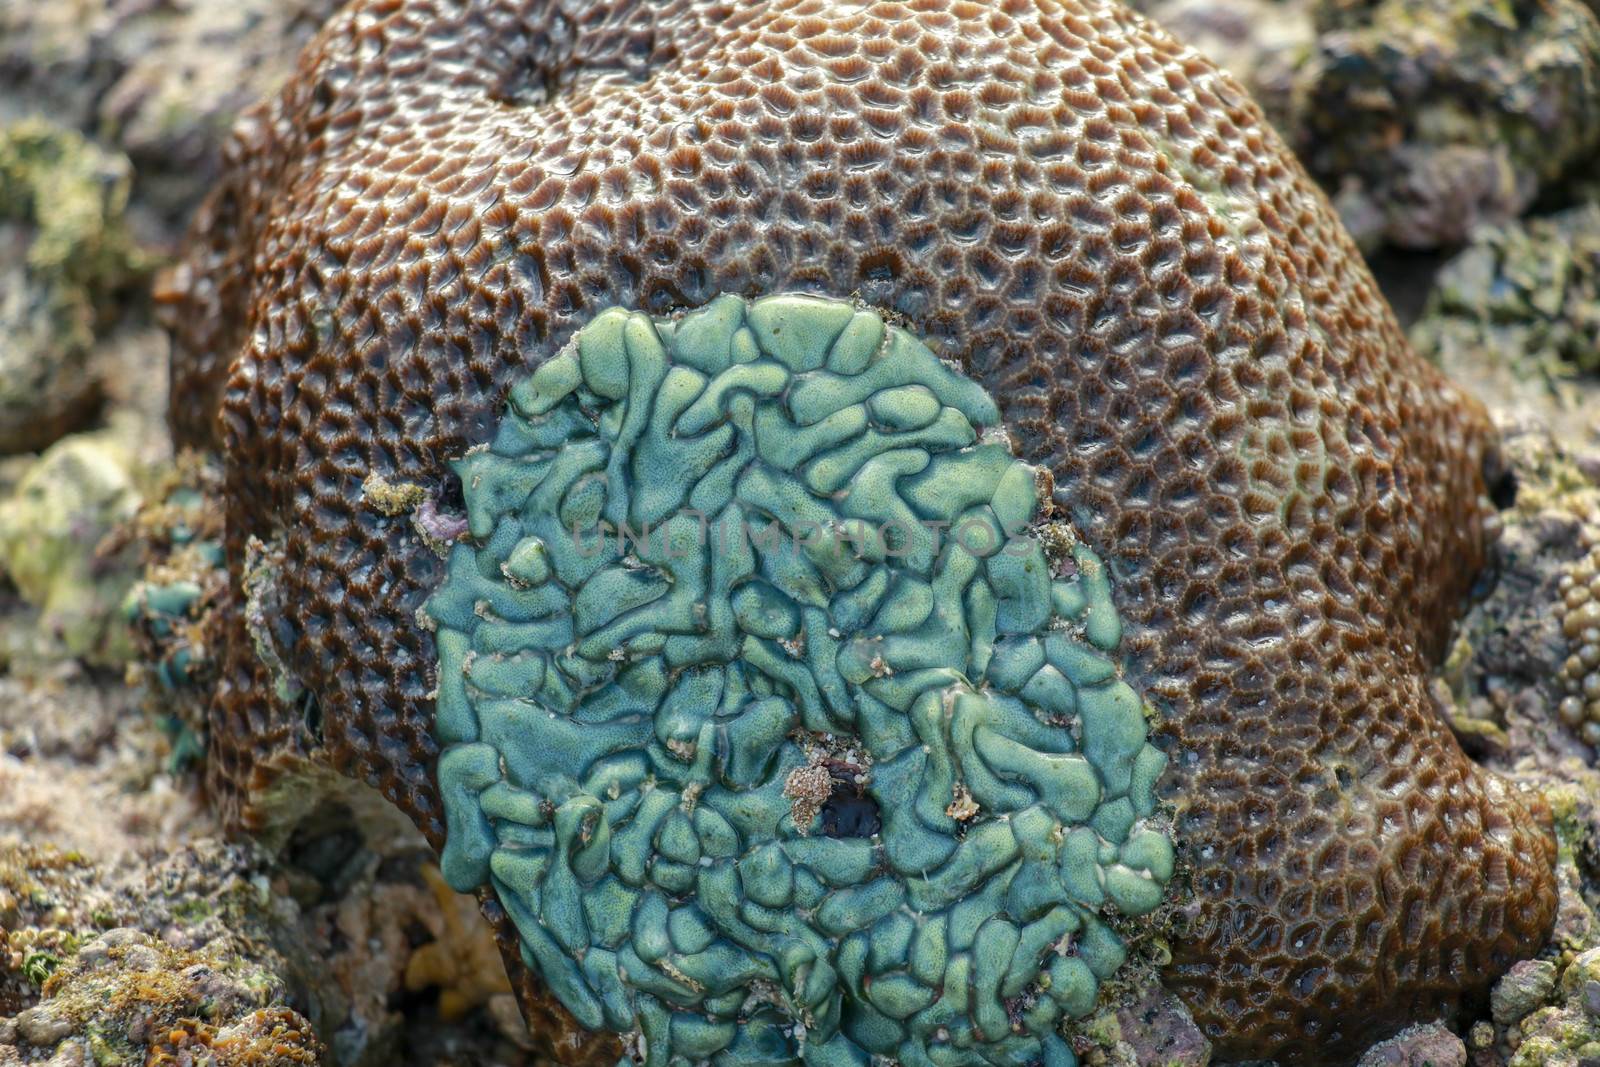 Hard coral background - a series of UNDERWATER IMAGES.